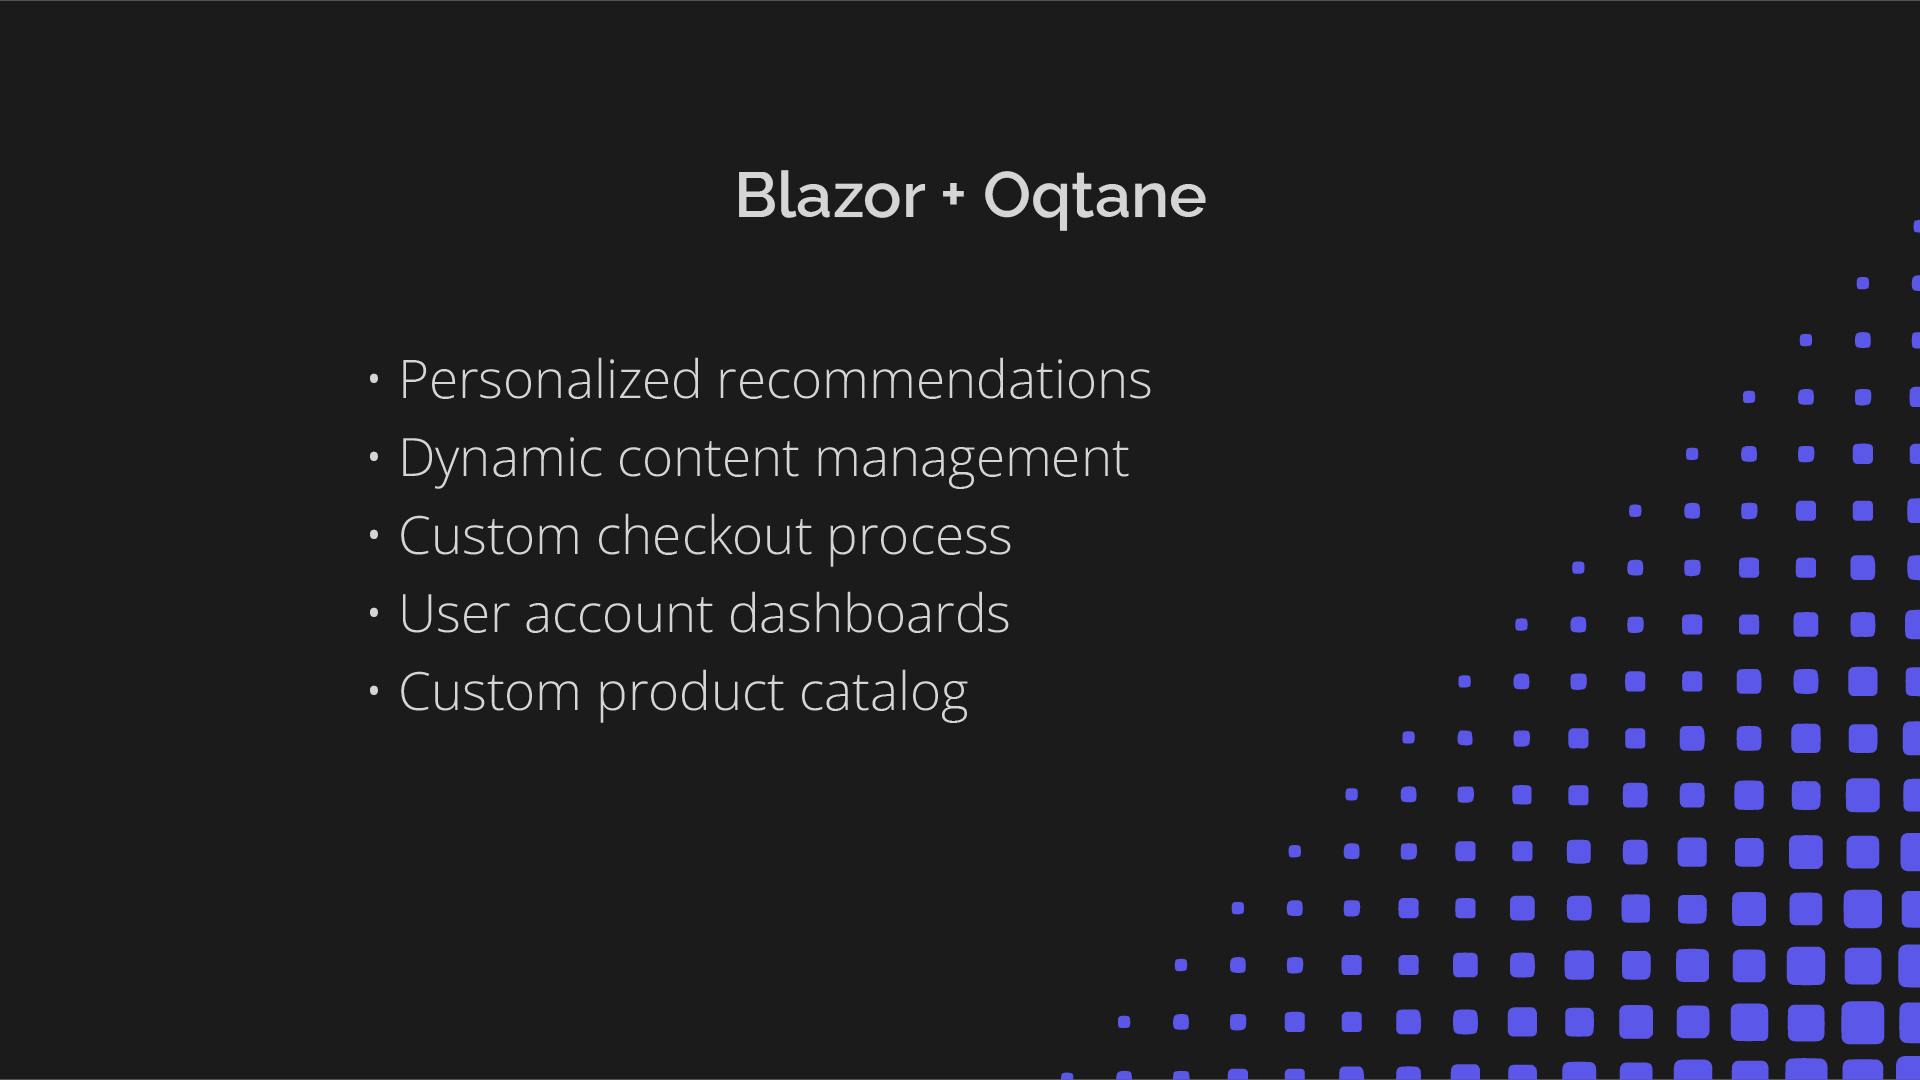 How to use Oqtane and Blazor for e-commerce projects